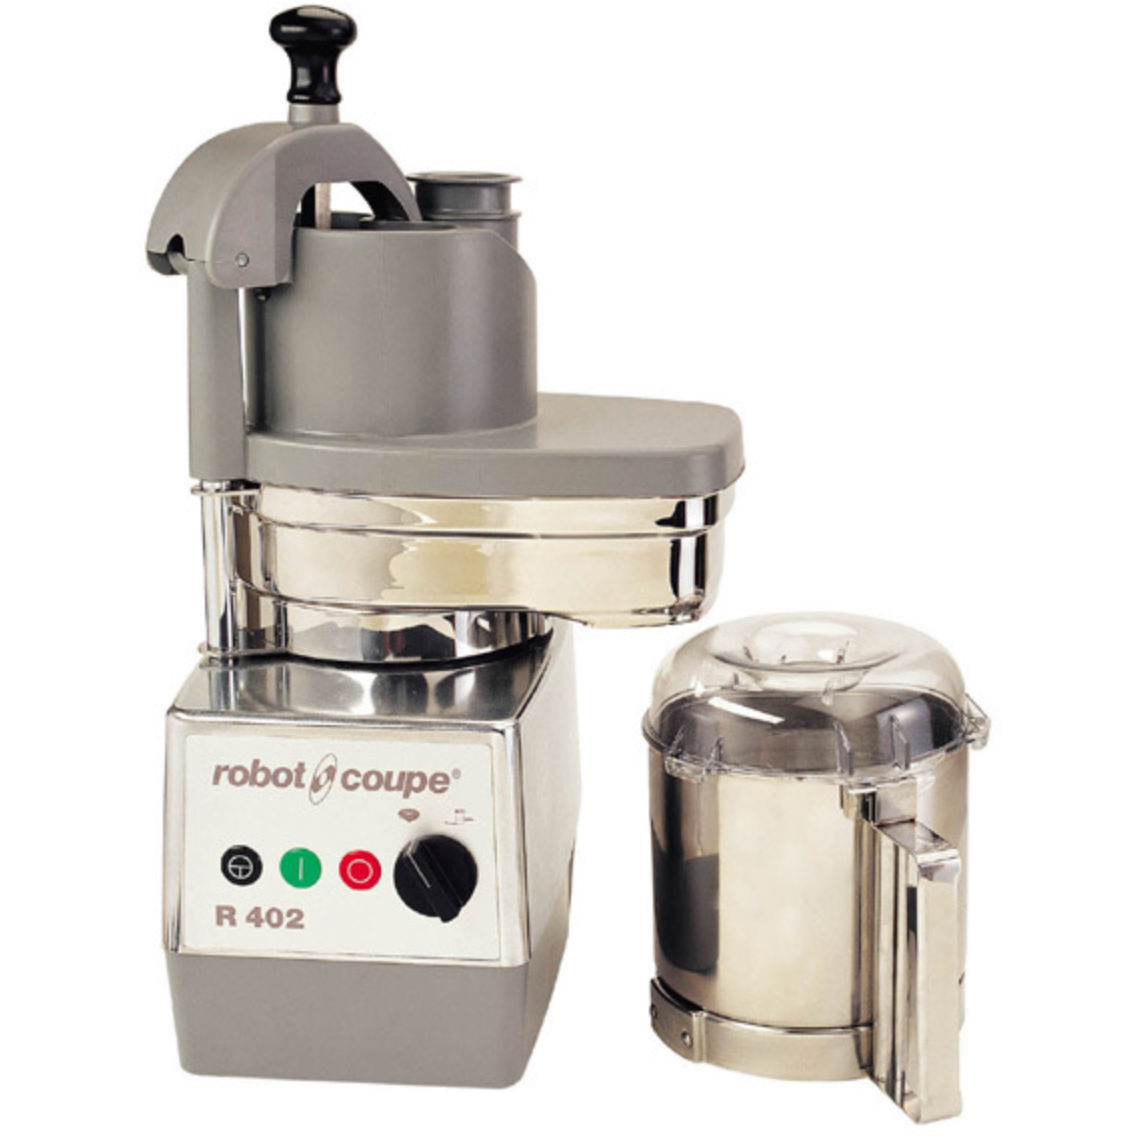 Robot Coupe R402 Combination Food Processor 4.5ltr 750w